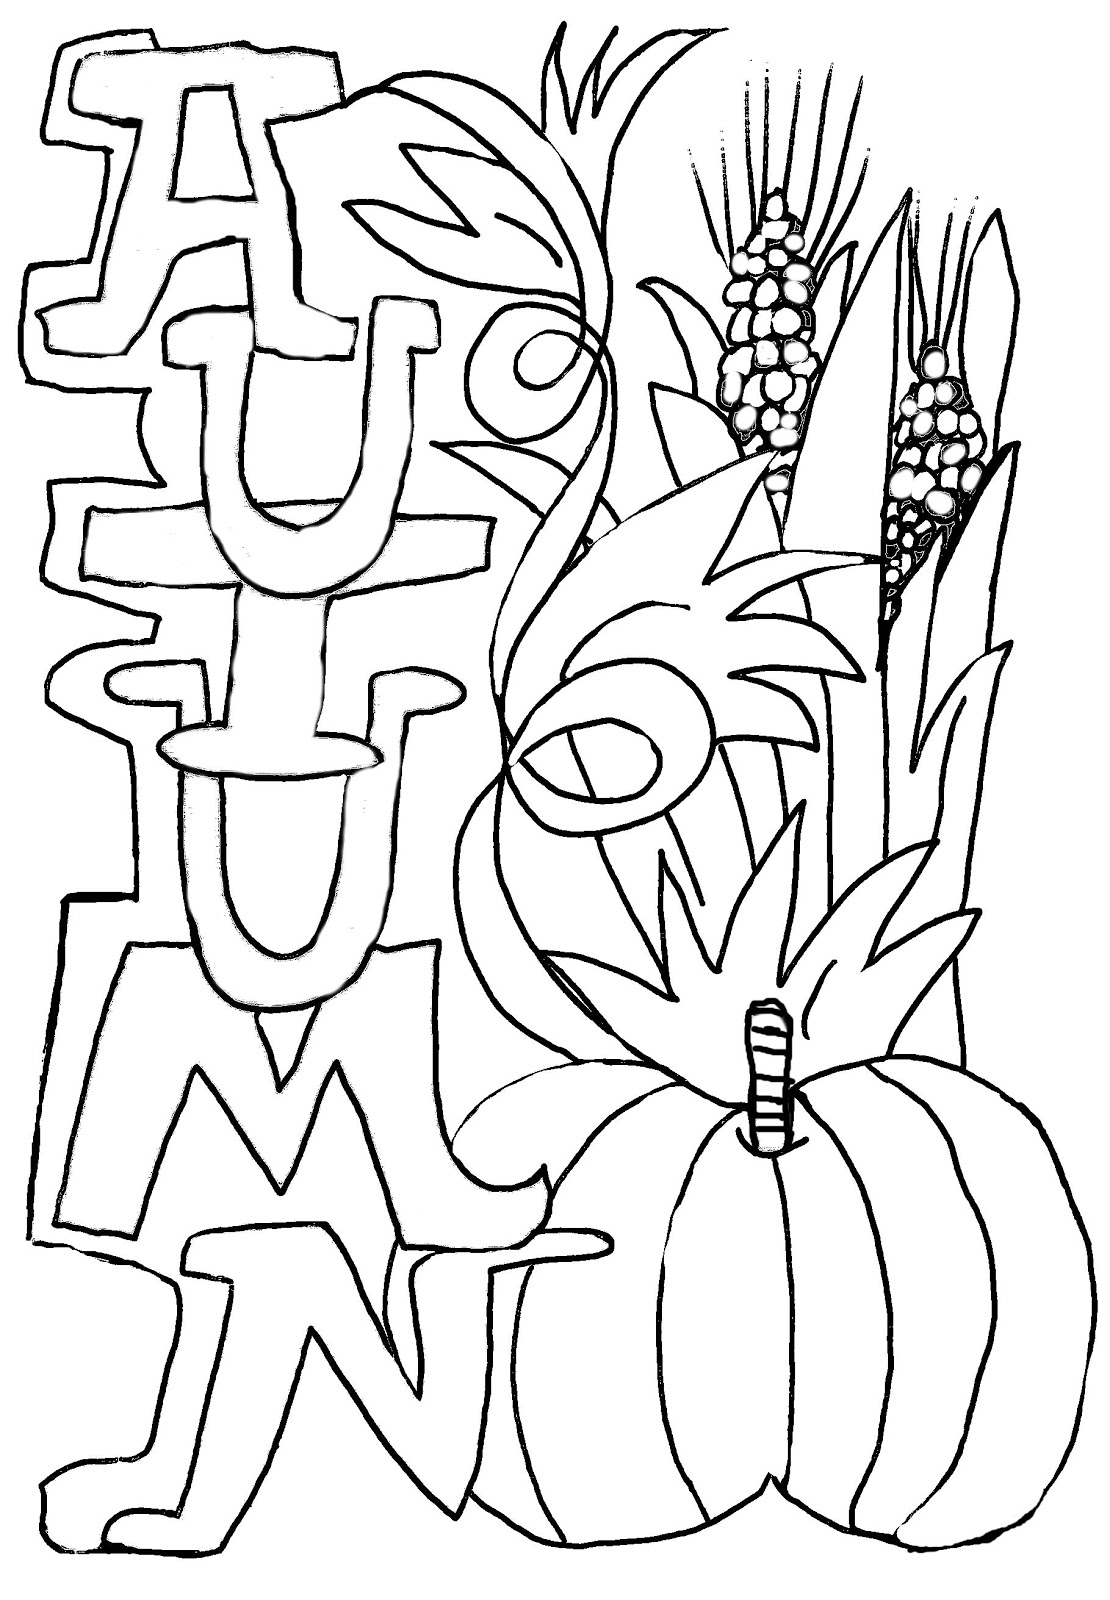 Download Treasure Box Drawing And Art For Jesus: The Word "Autumn" Border Edge